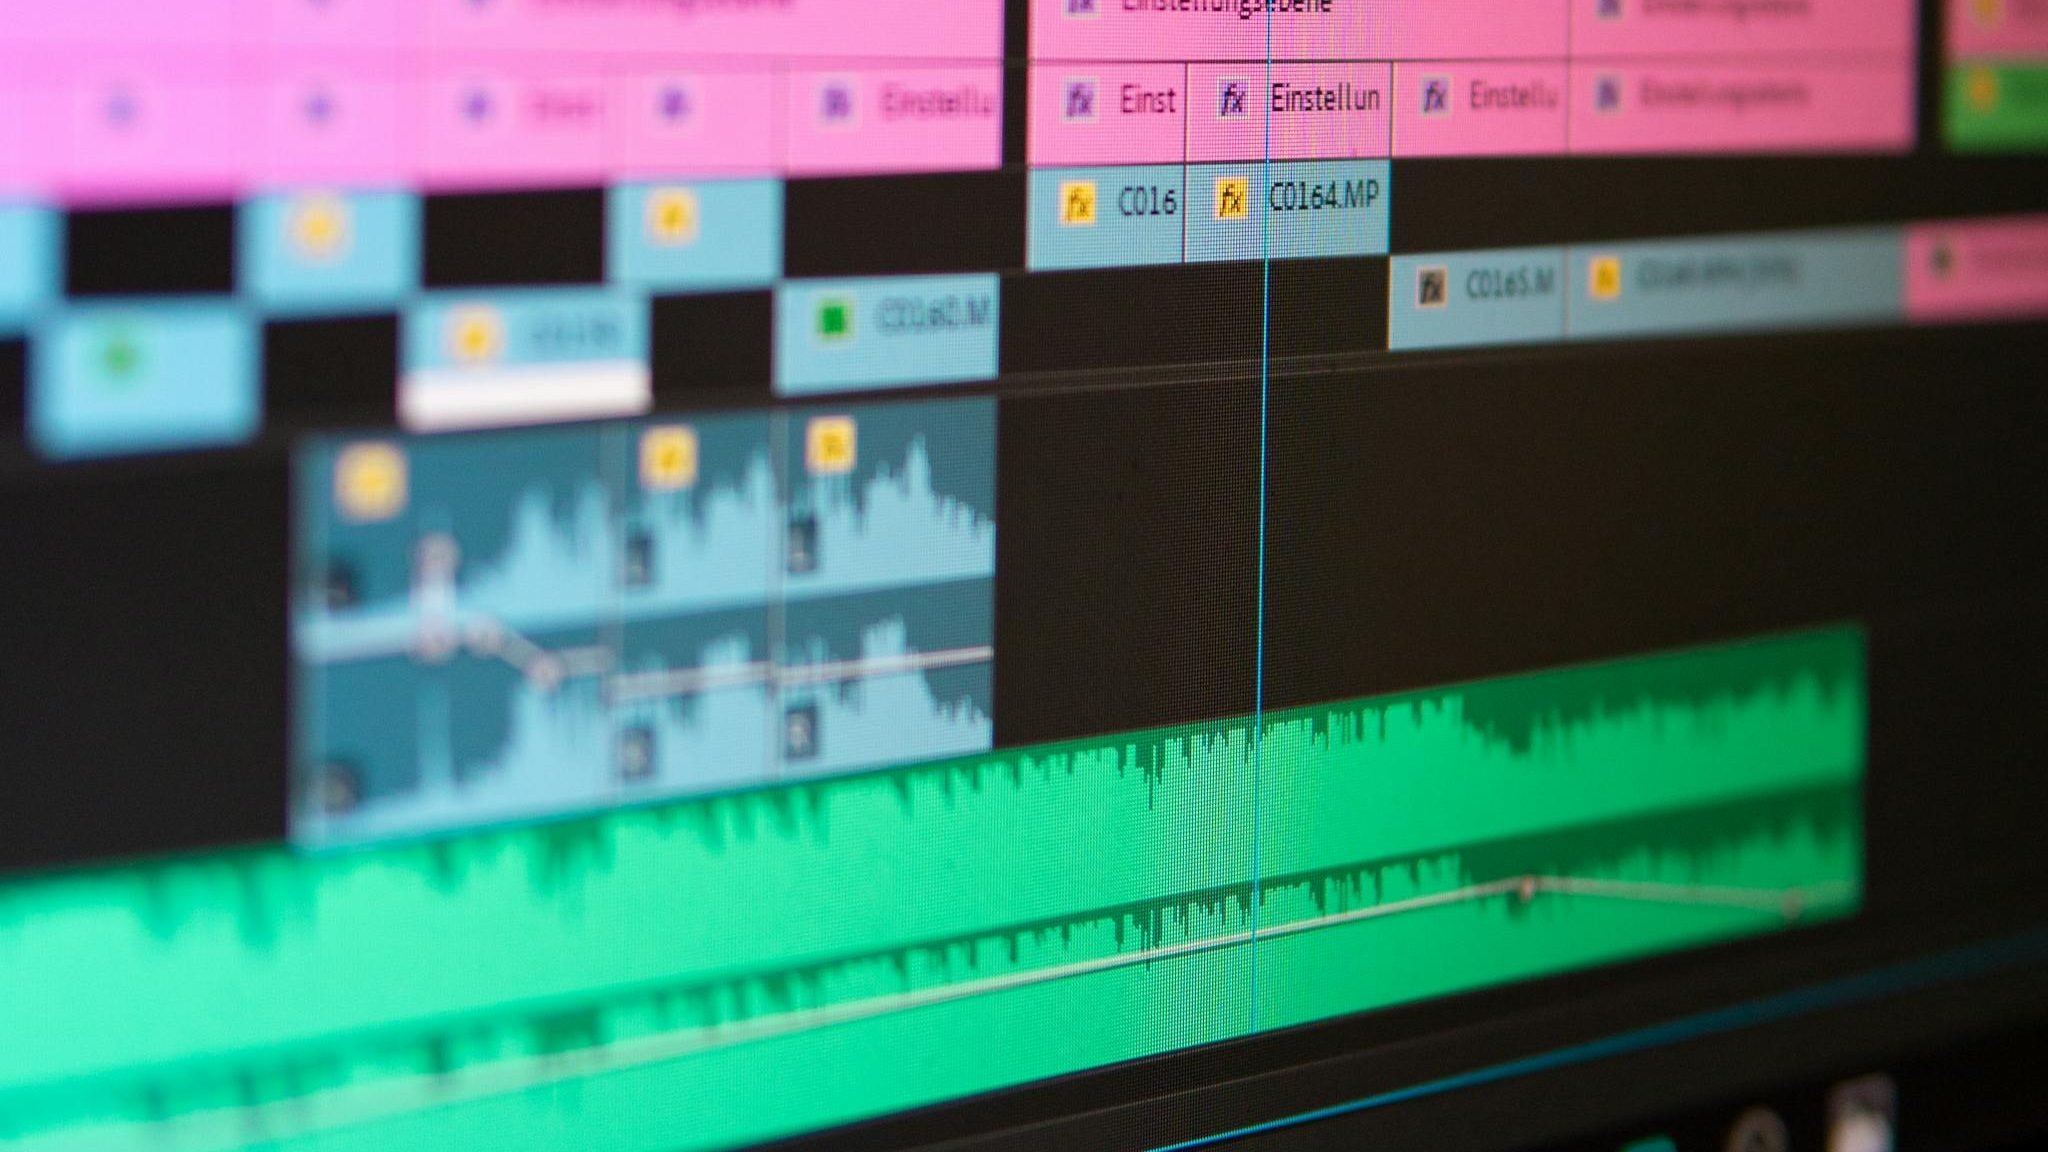 Close-up view of a video editing session window with multiple layered audio tracks.